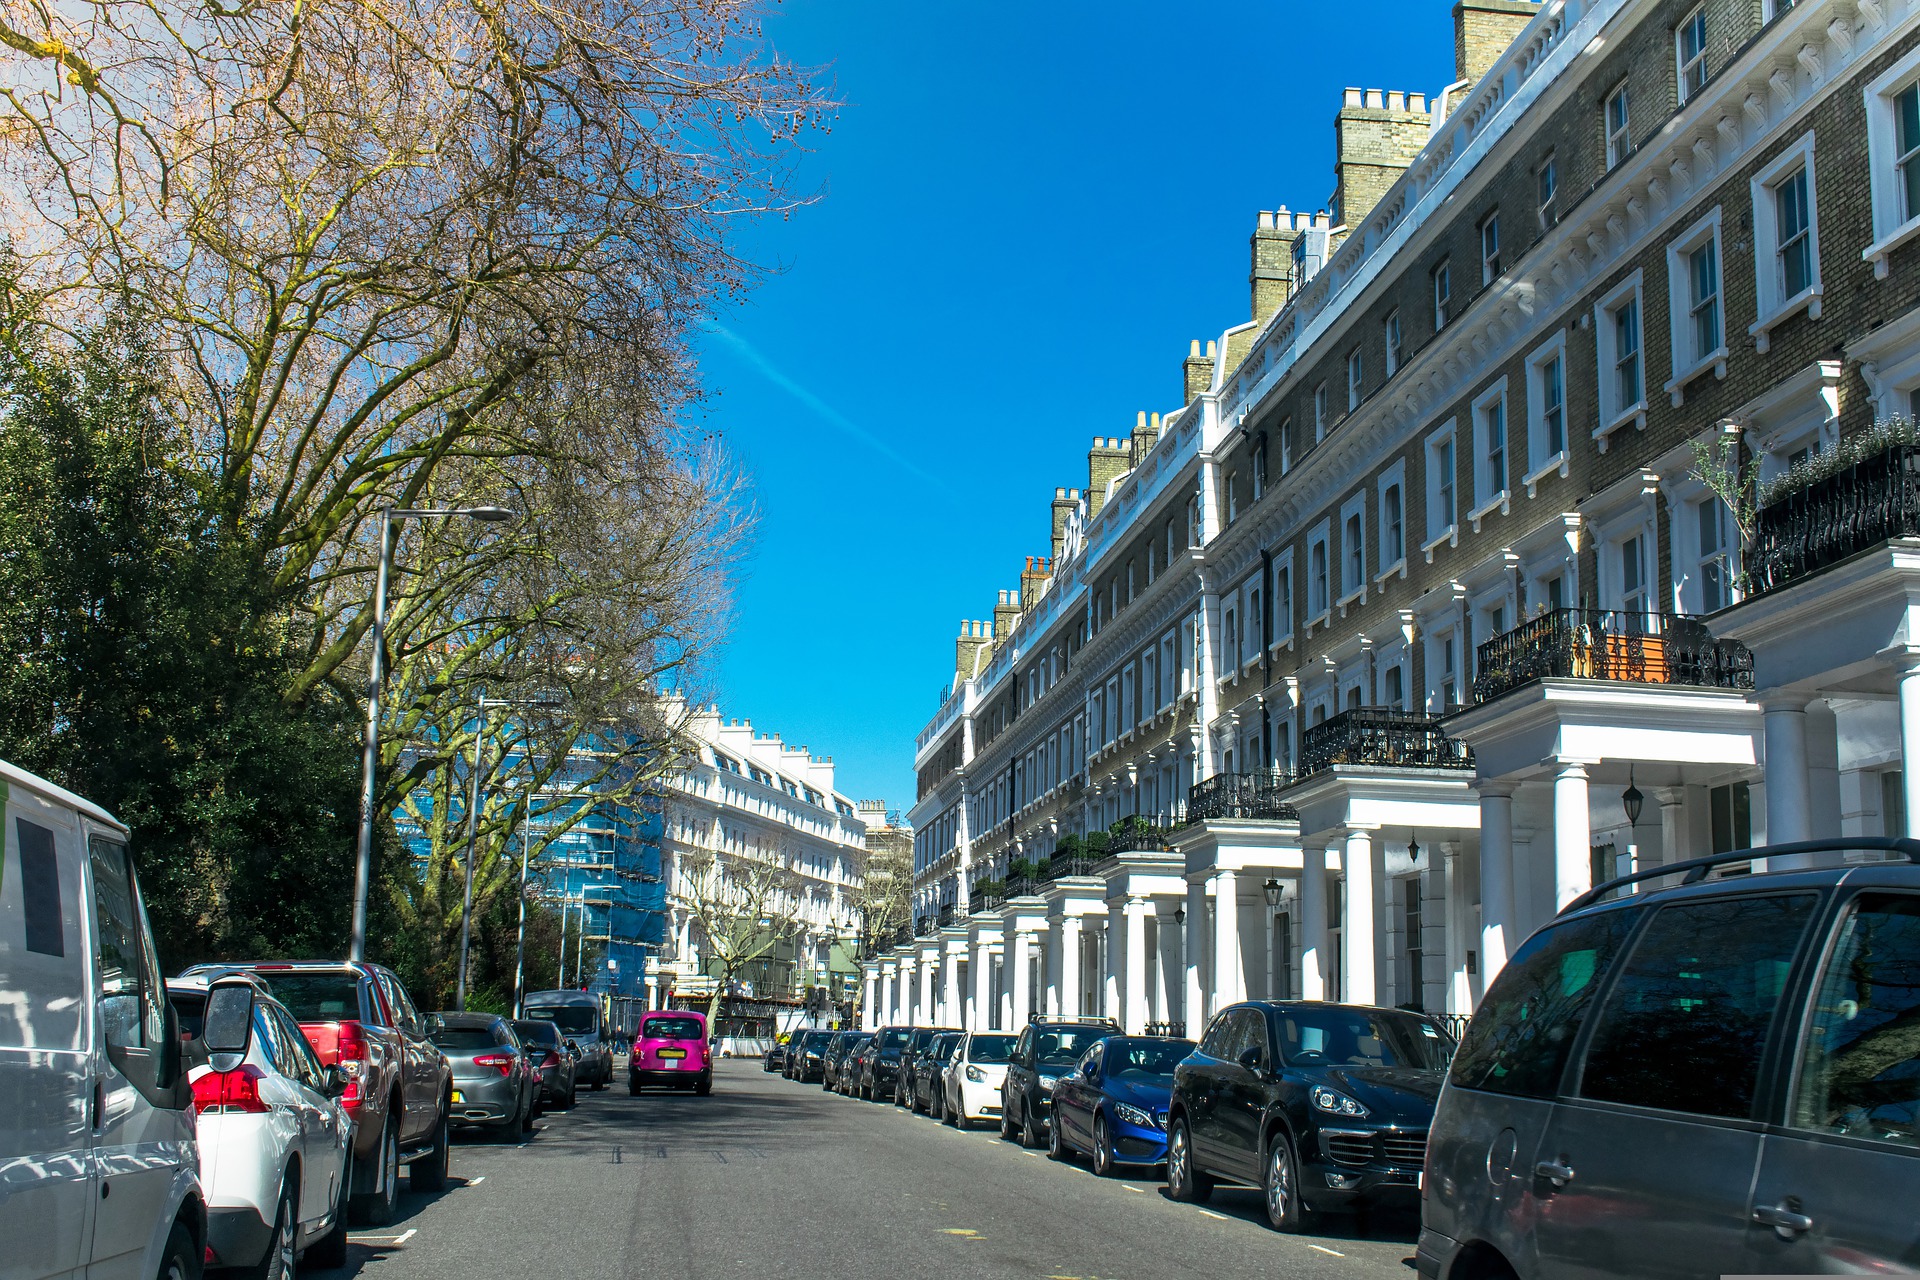 London council could seize oligarchs’ homes for affordable housing